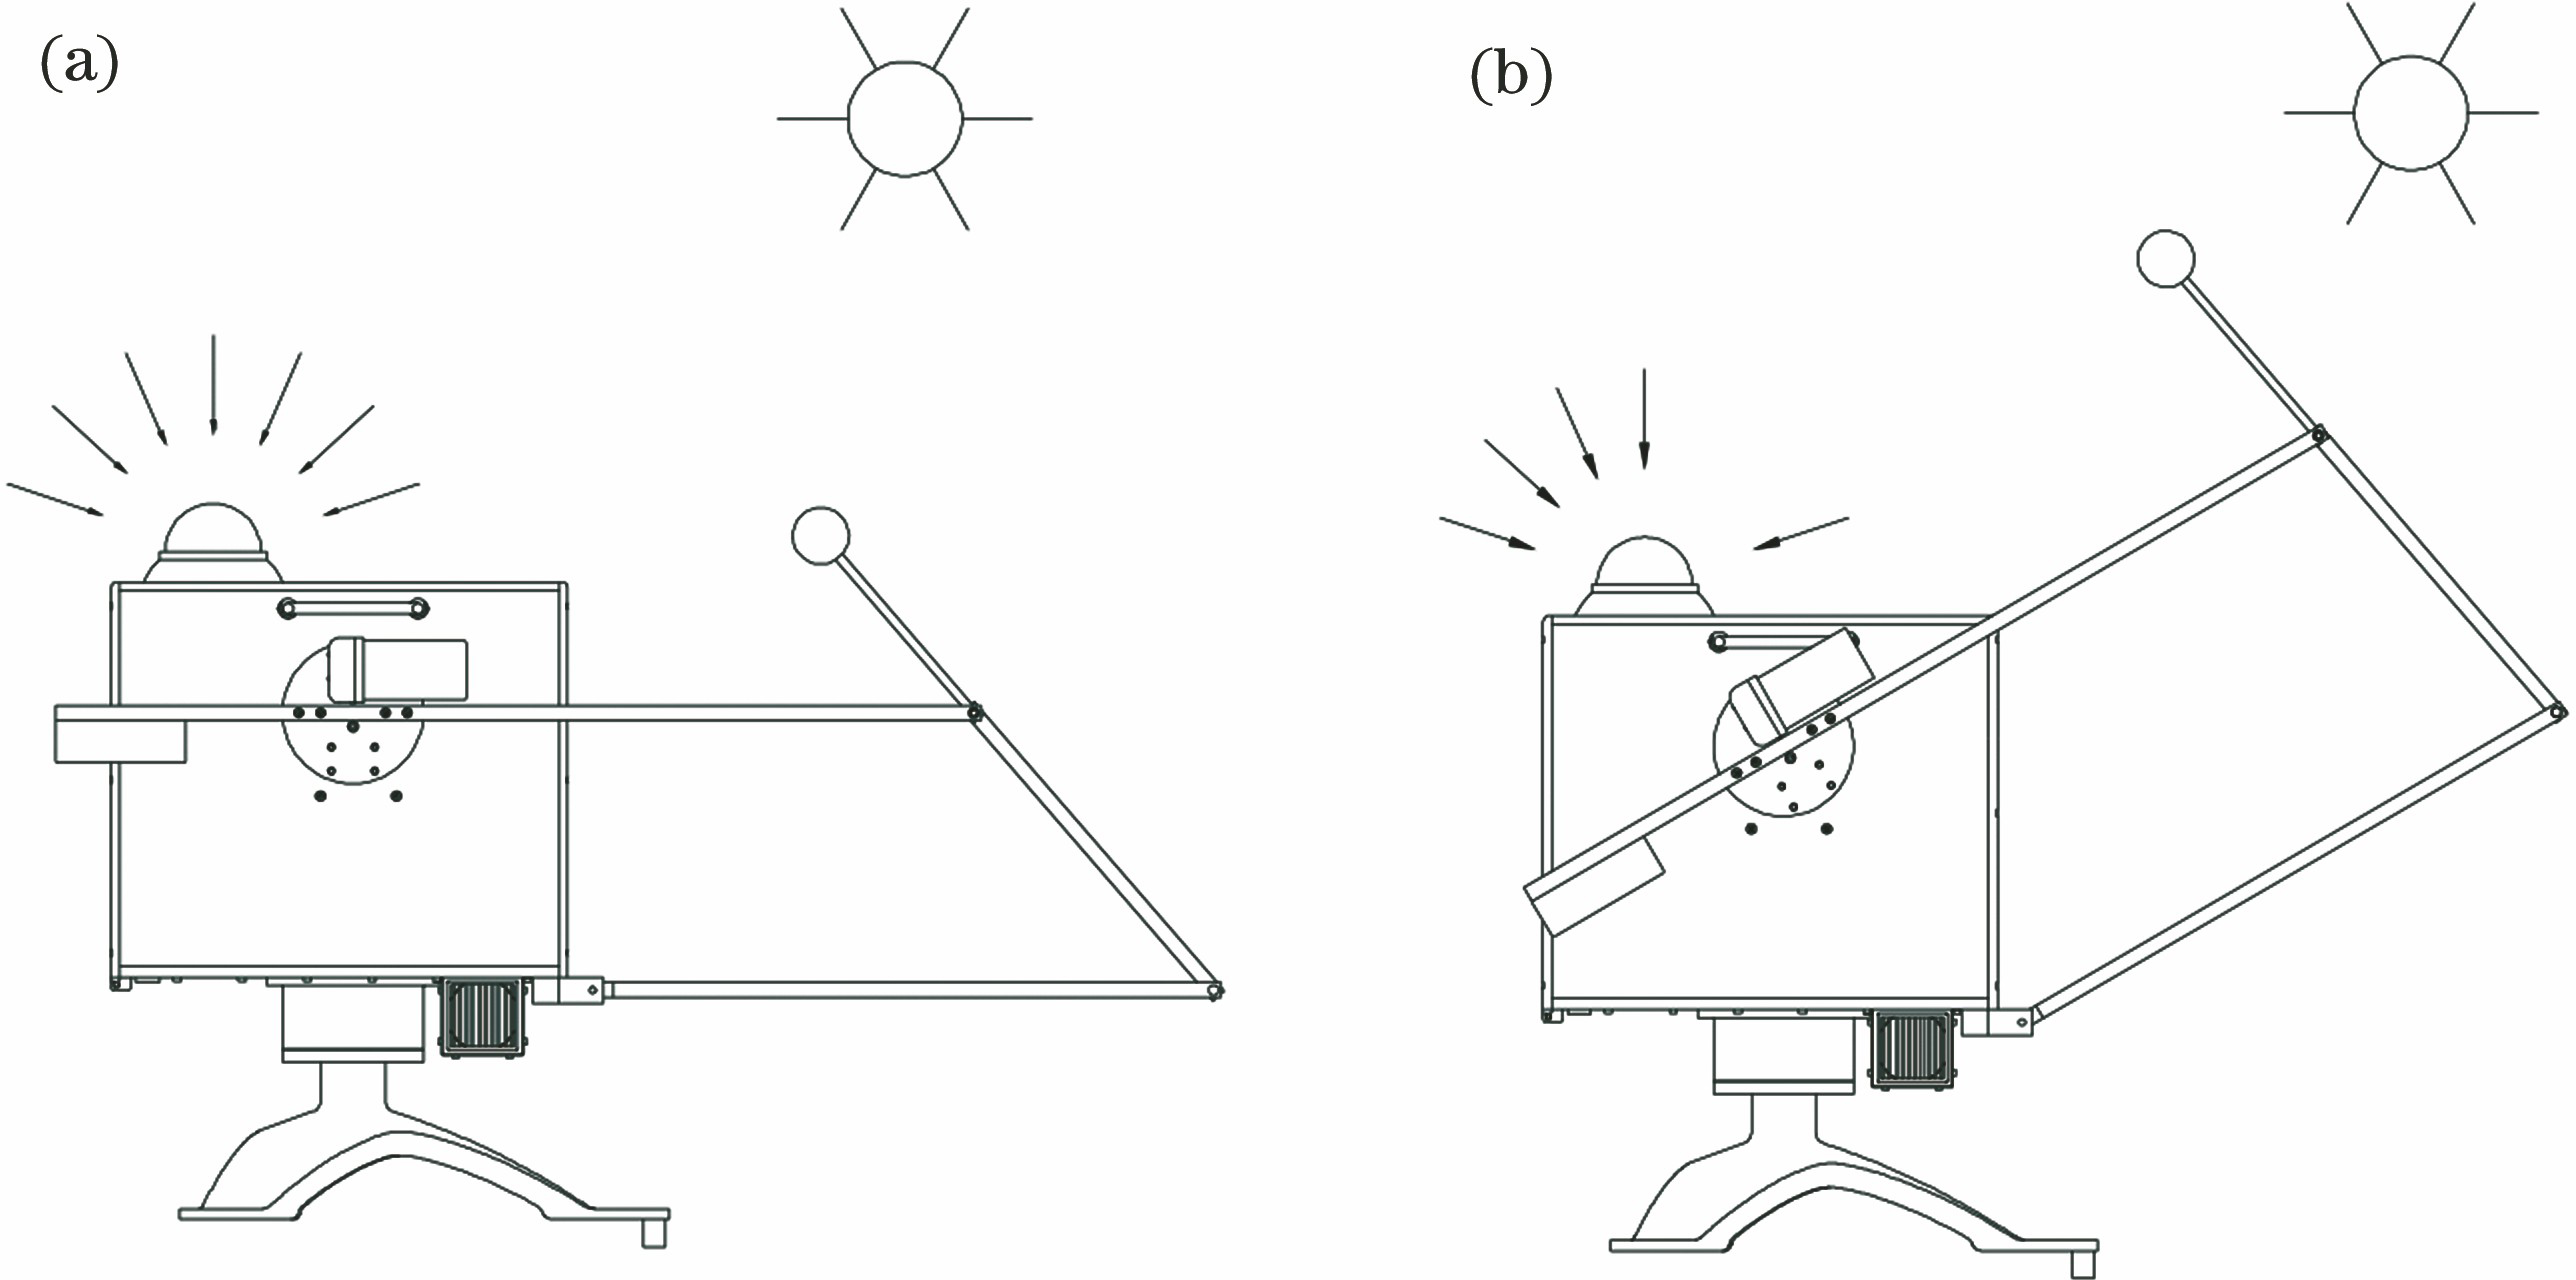 Measurement schematic. (a) Full irradiance measurement; (b) diffuse irradiance measurement